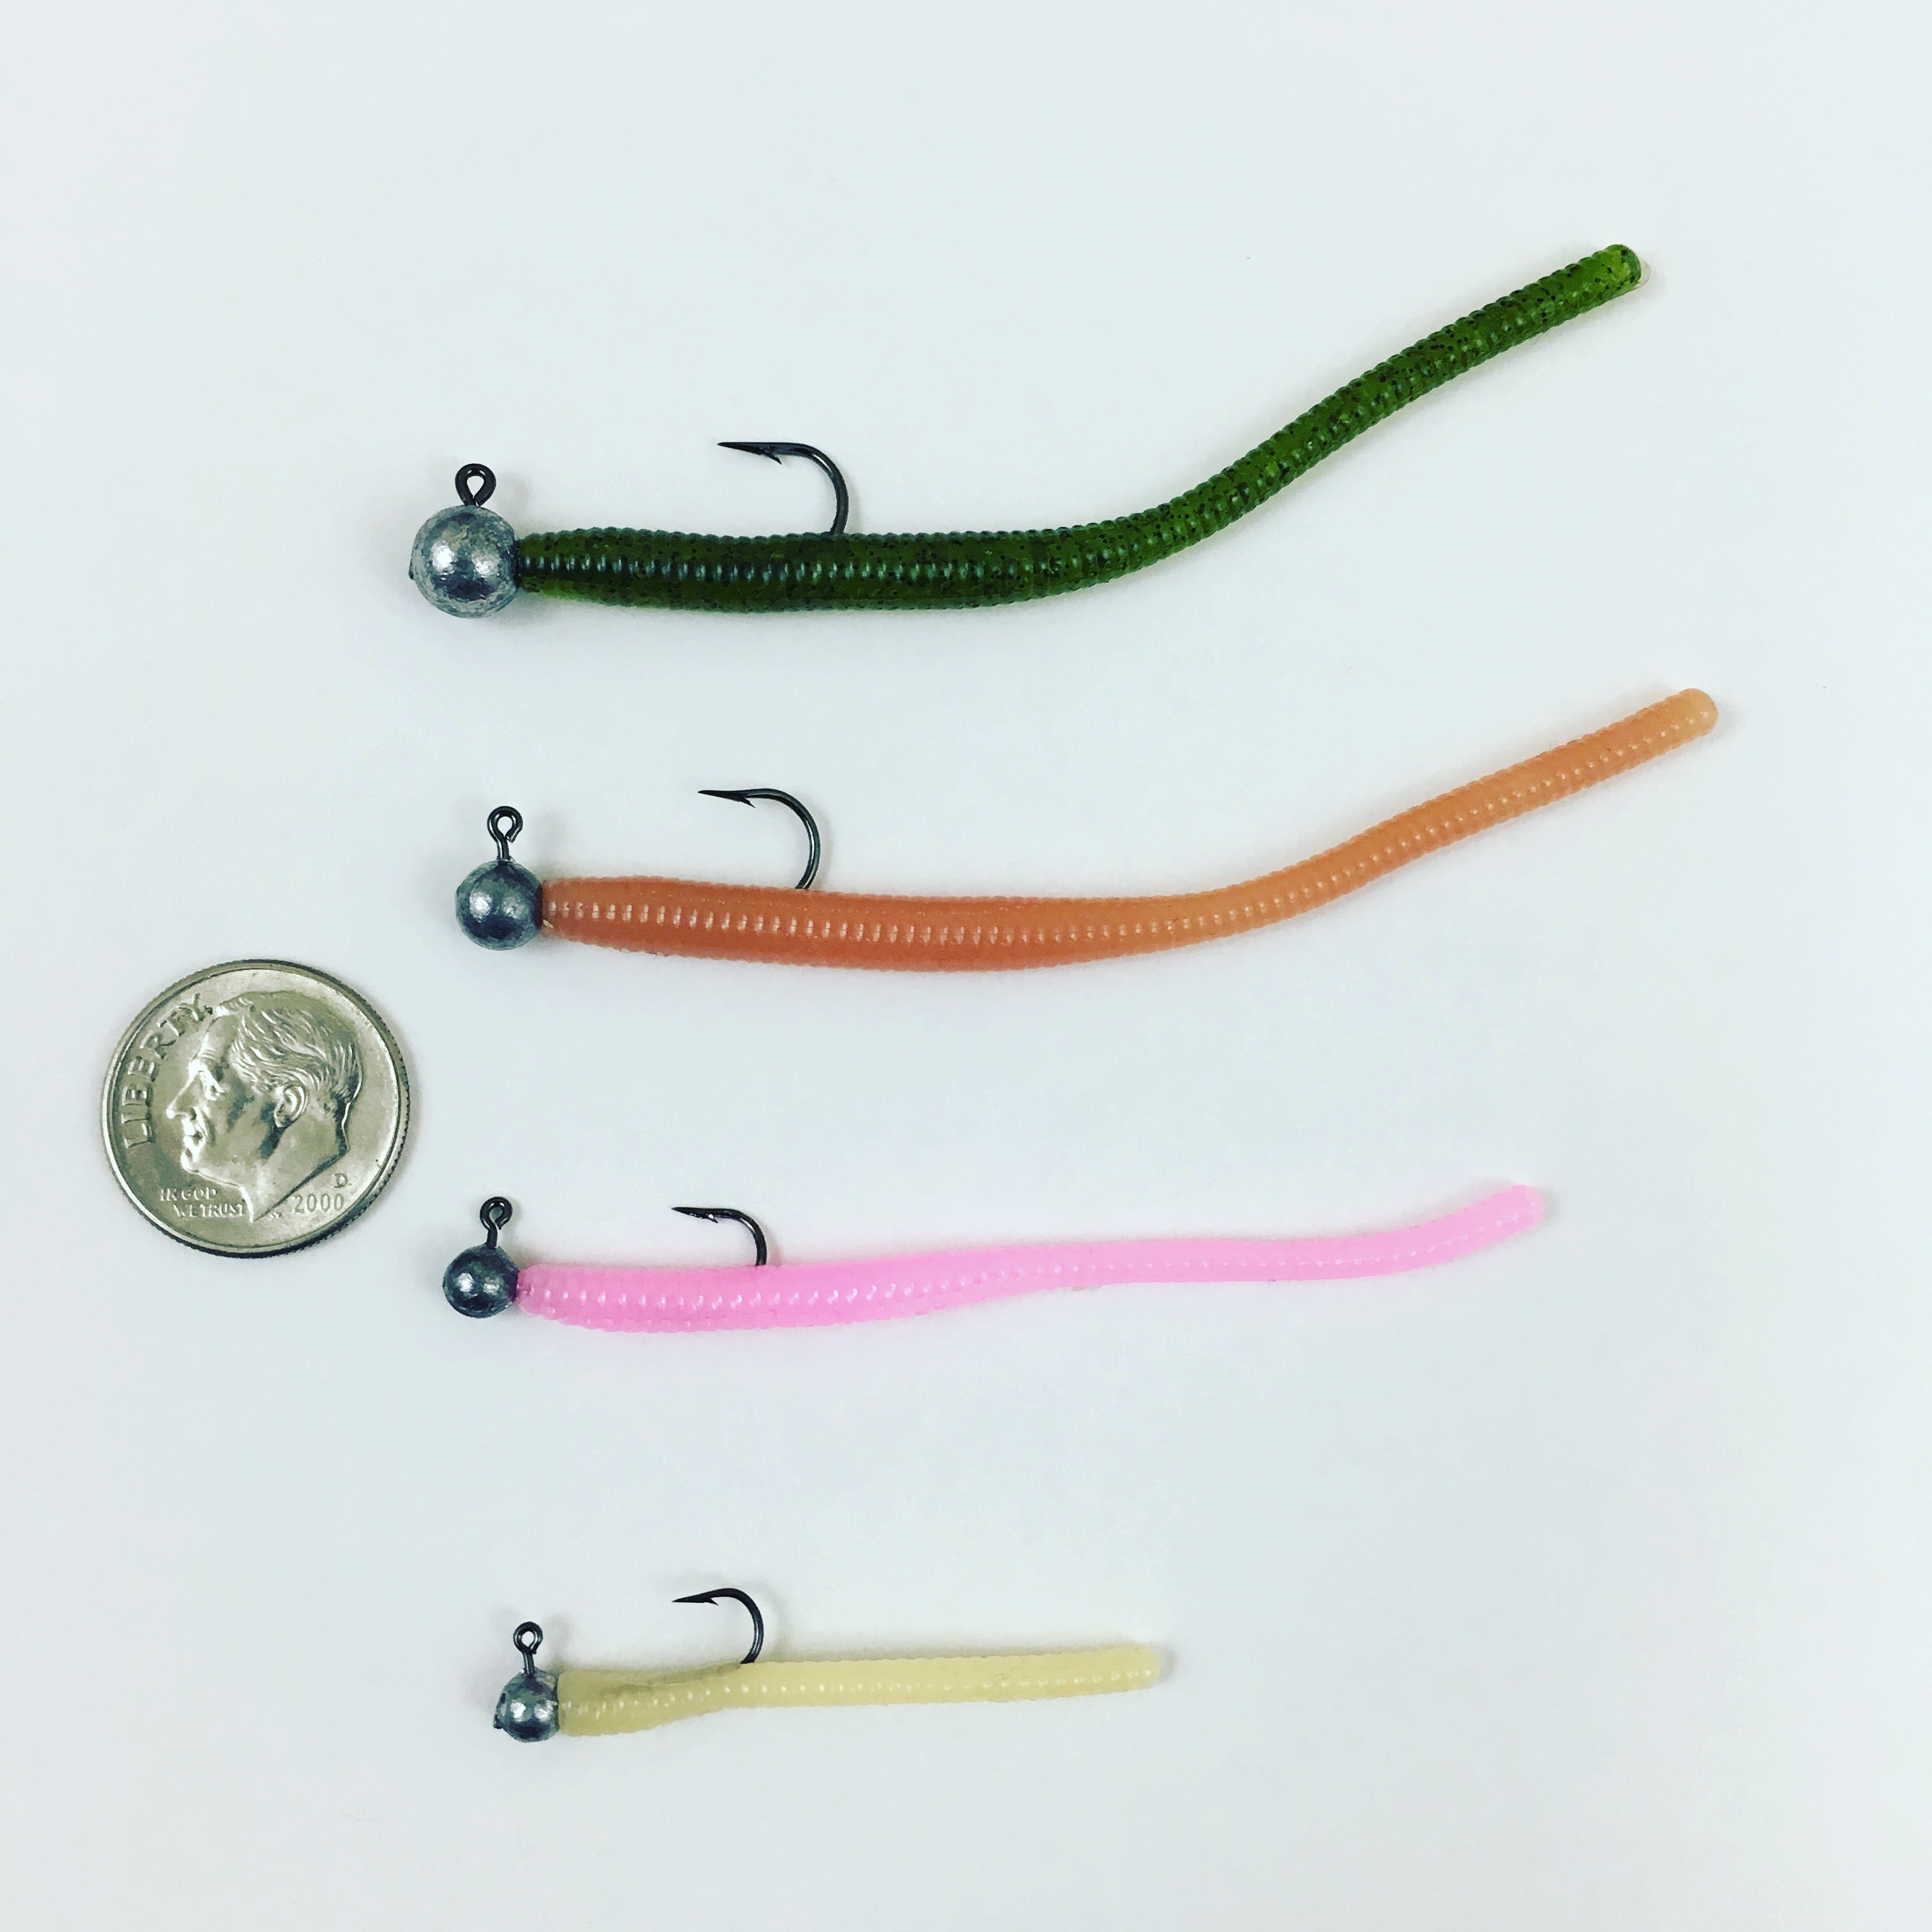 Trout Worms: Red Wiggler